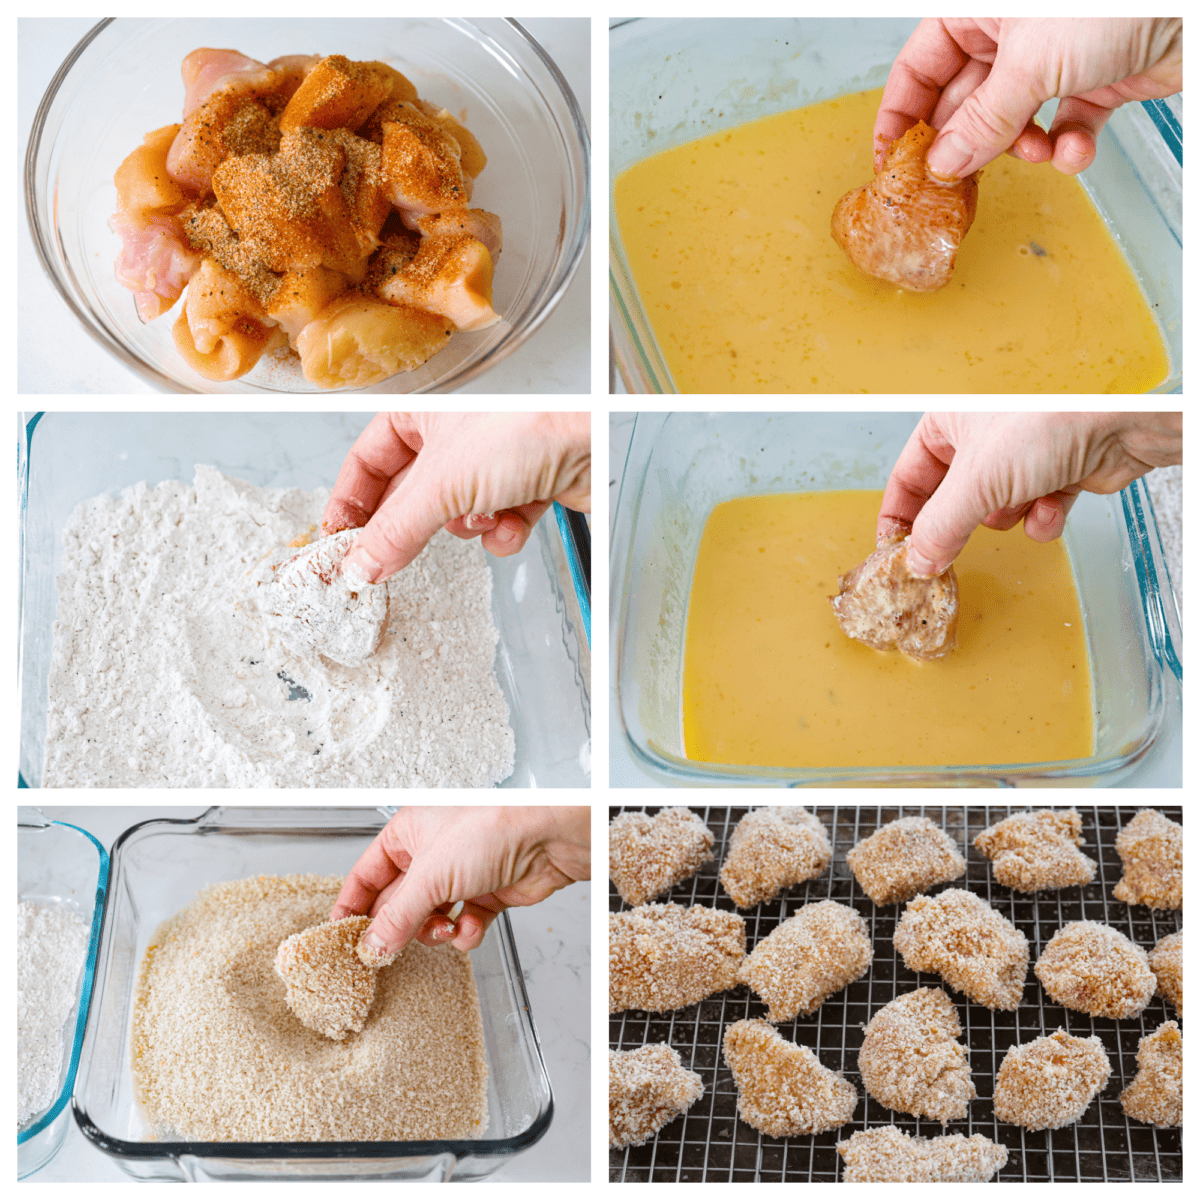 A piece of chicken being breaded, step-by-step.